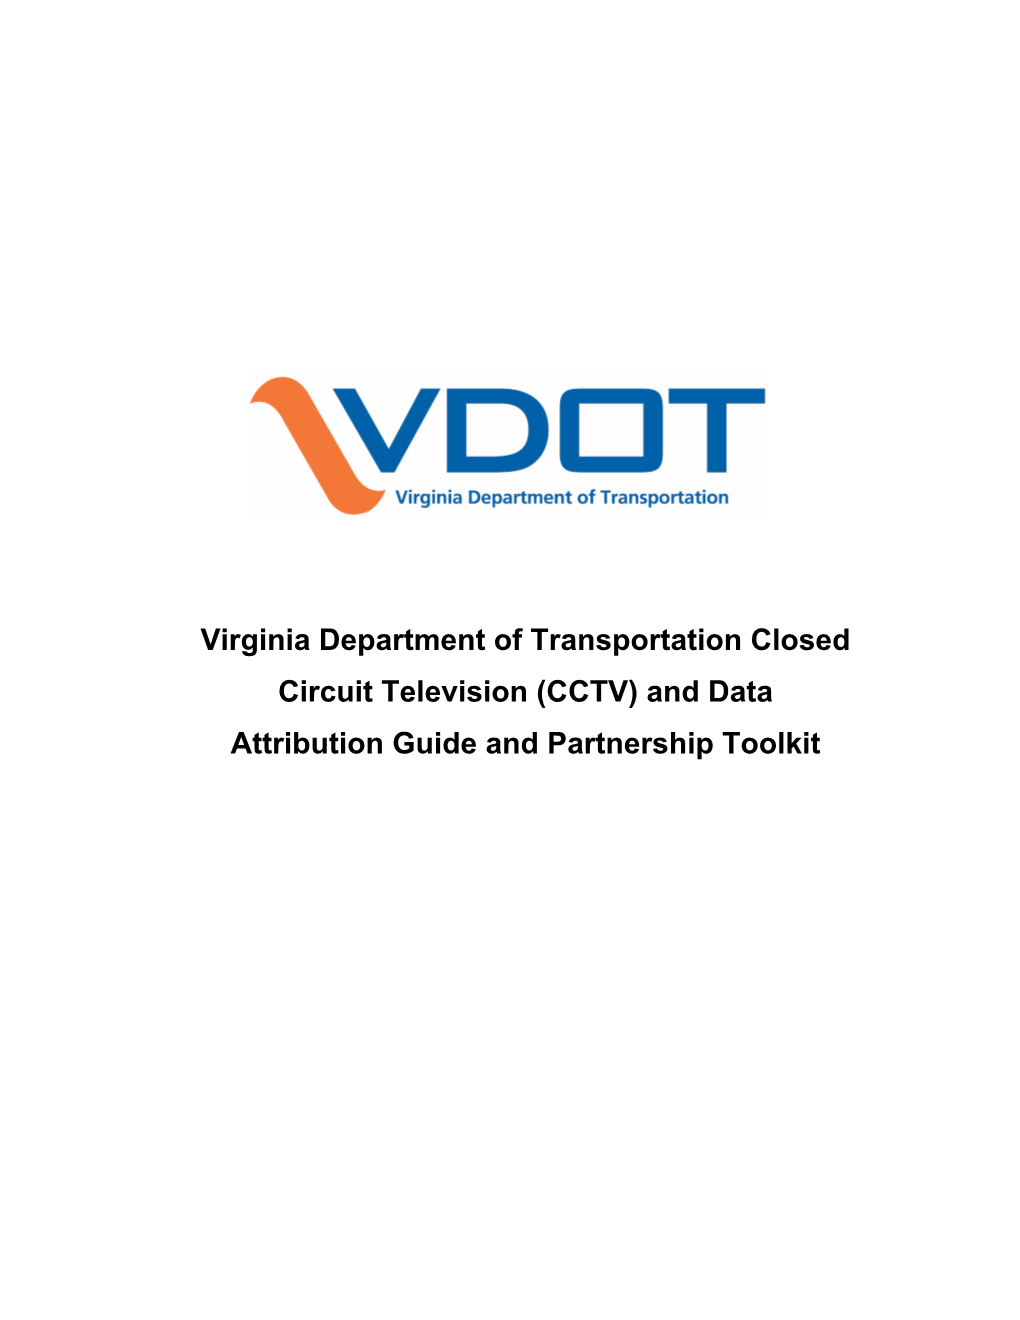 Virginia Department of Transportation Closed Circuit Television (CCTV) and Data Attribution Guide and Partnership Toolkit